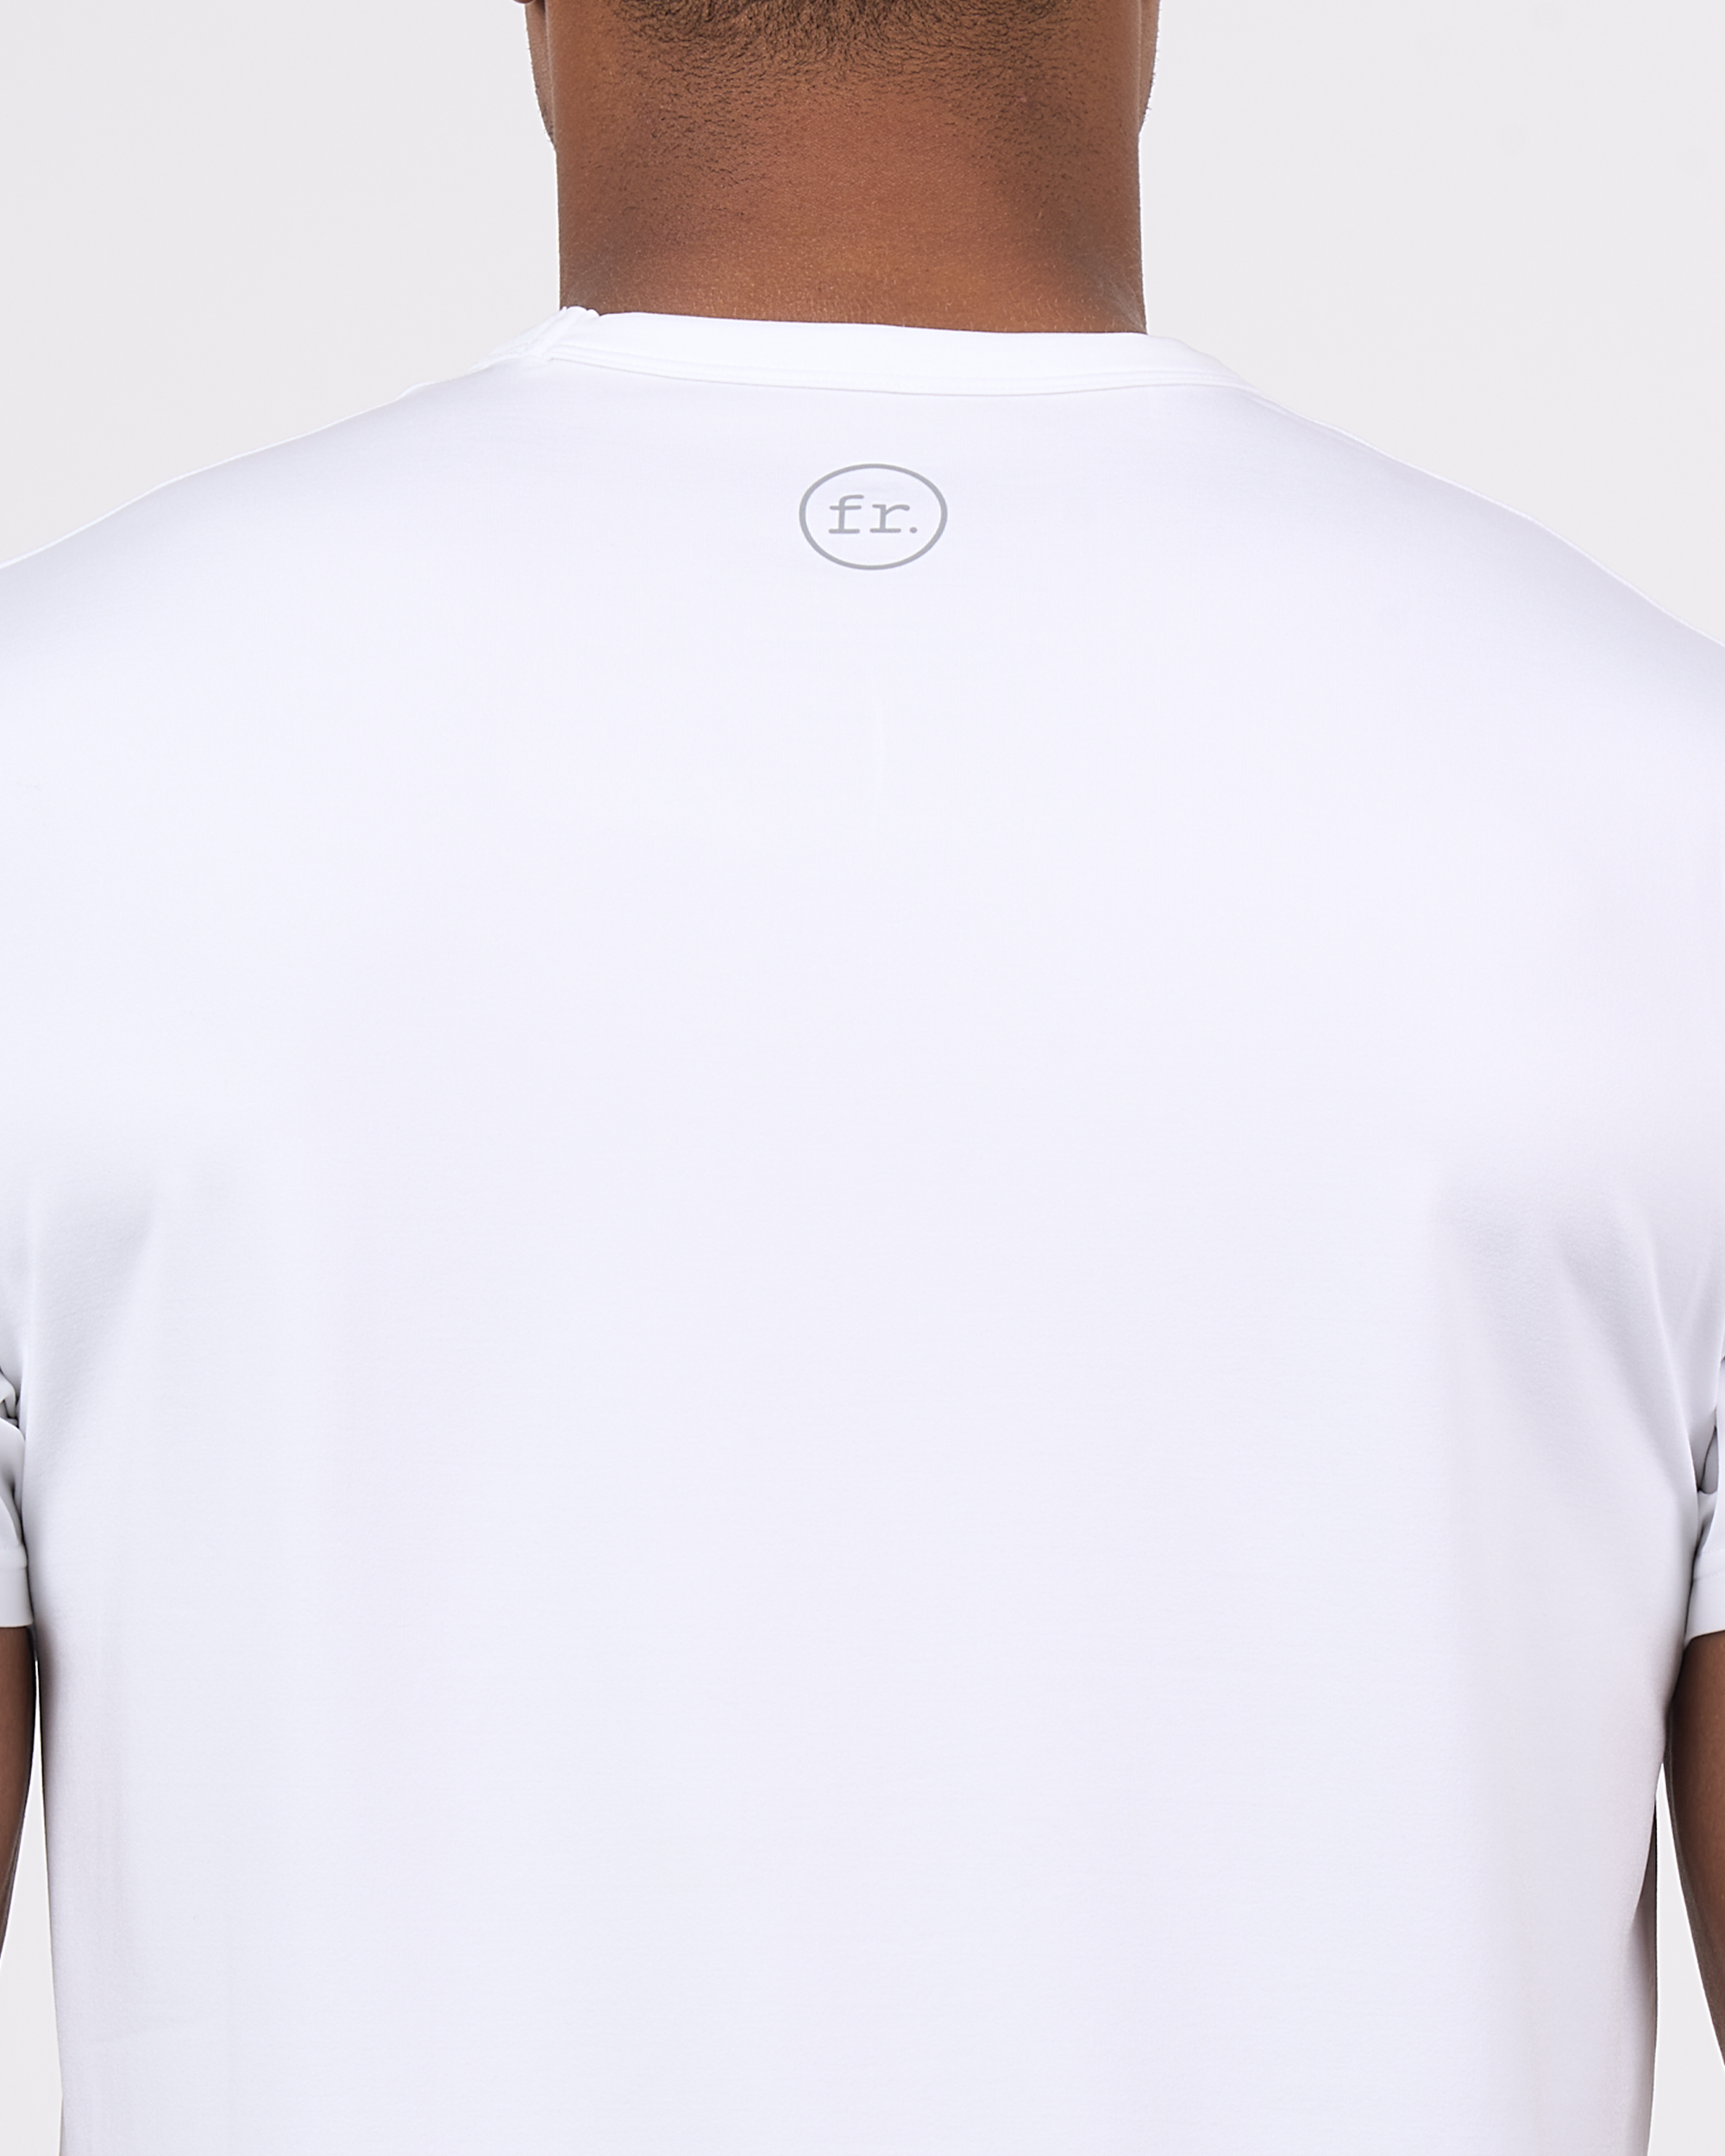 Foreign Rider Co Technical Fabric White Short Sleeve T-Shirt Top Back FR Logo Detail